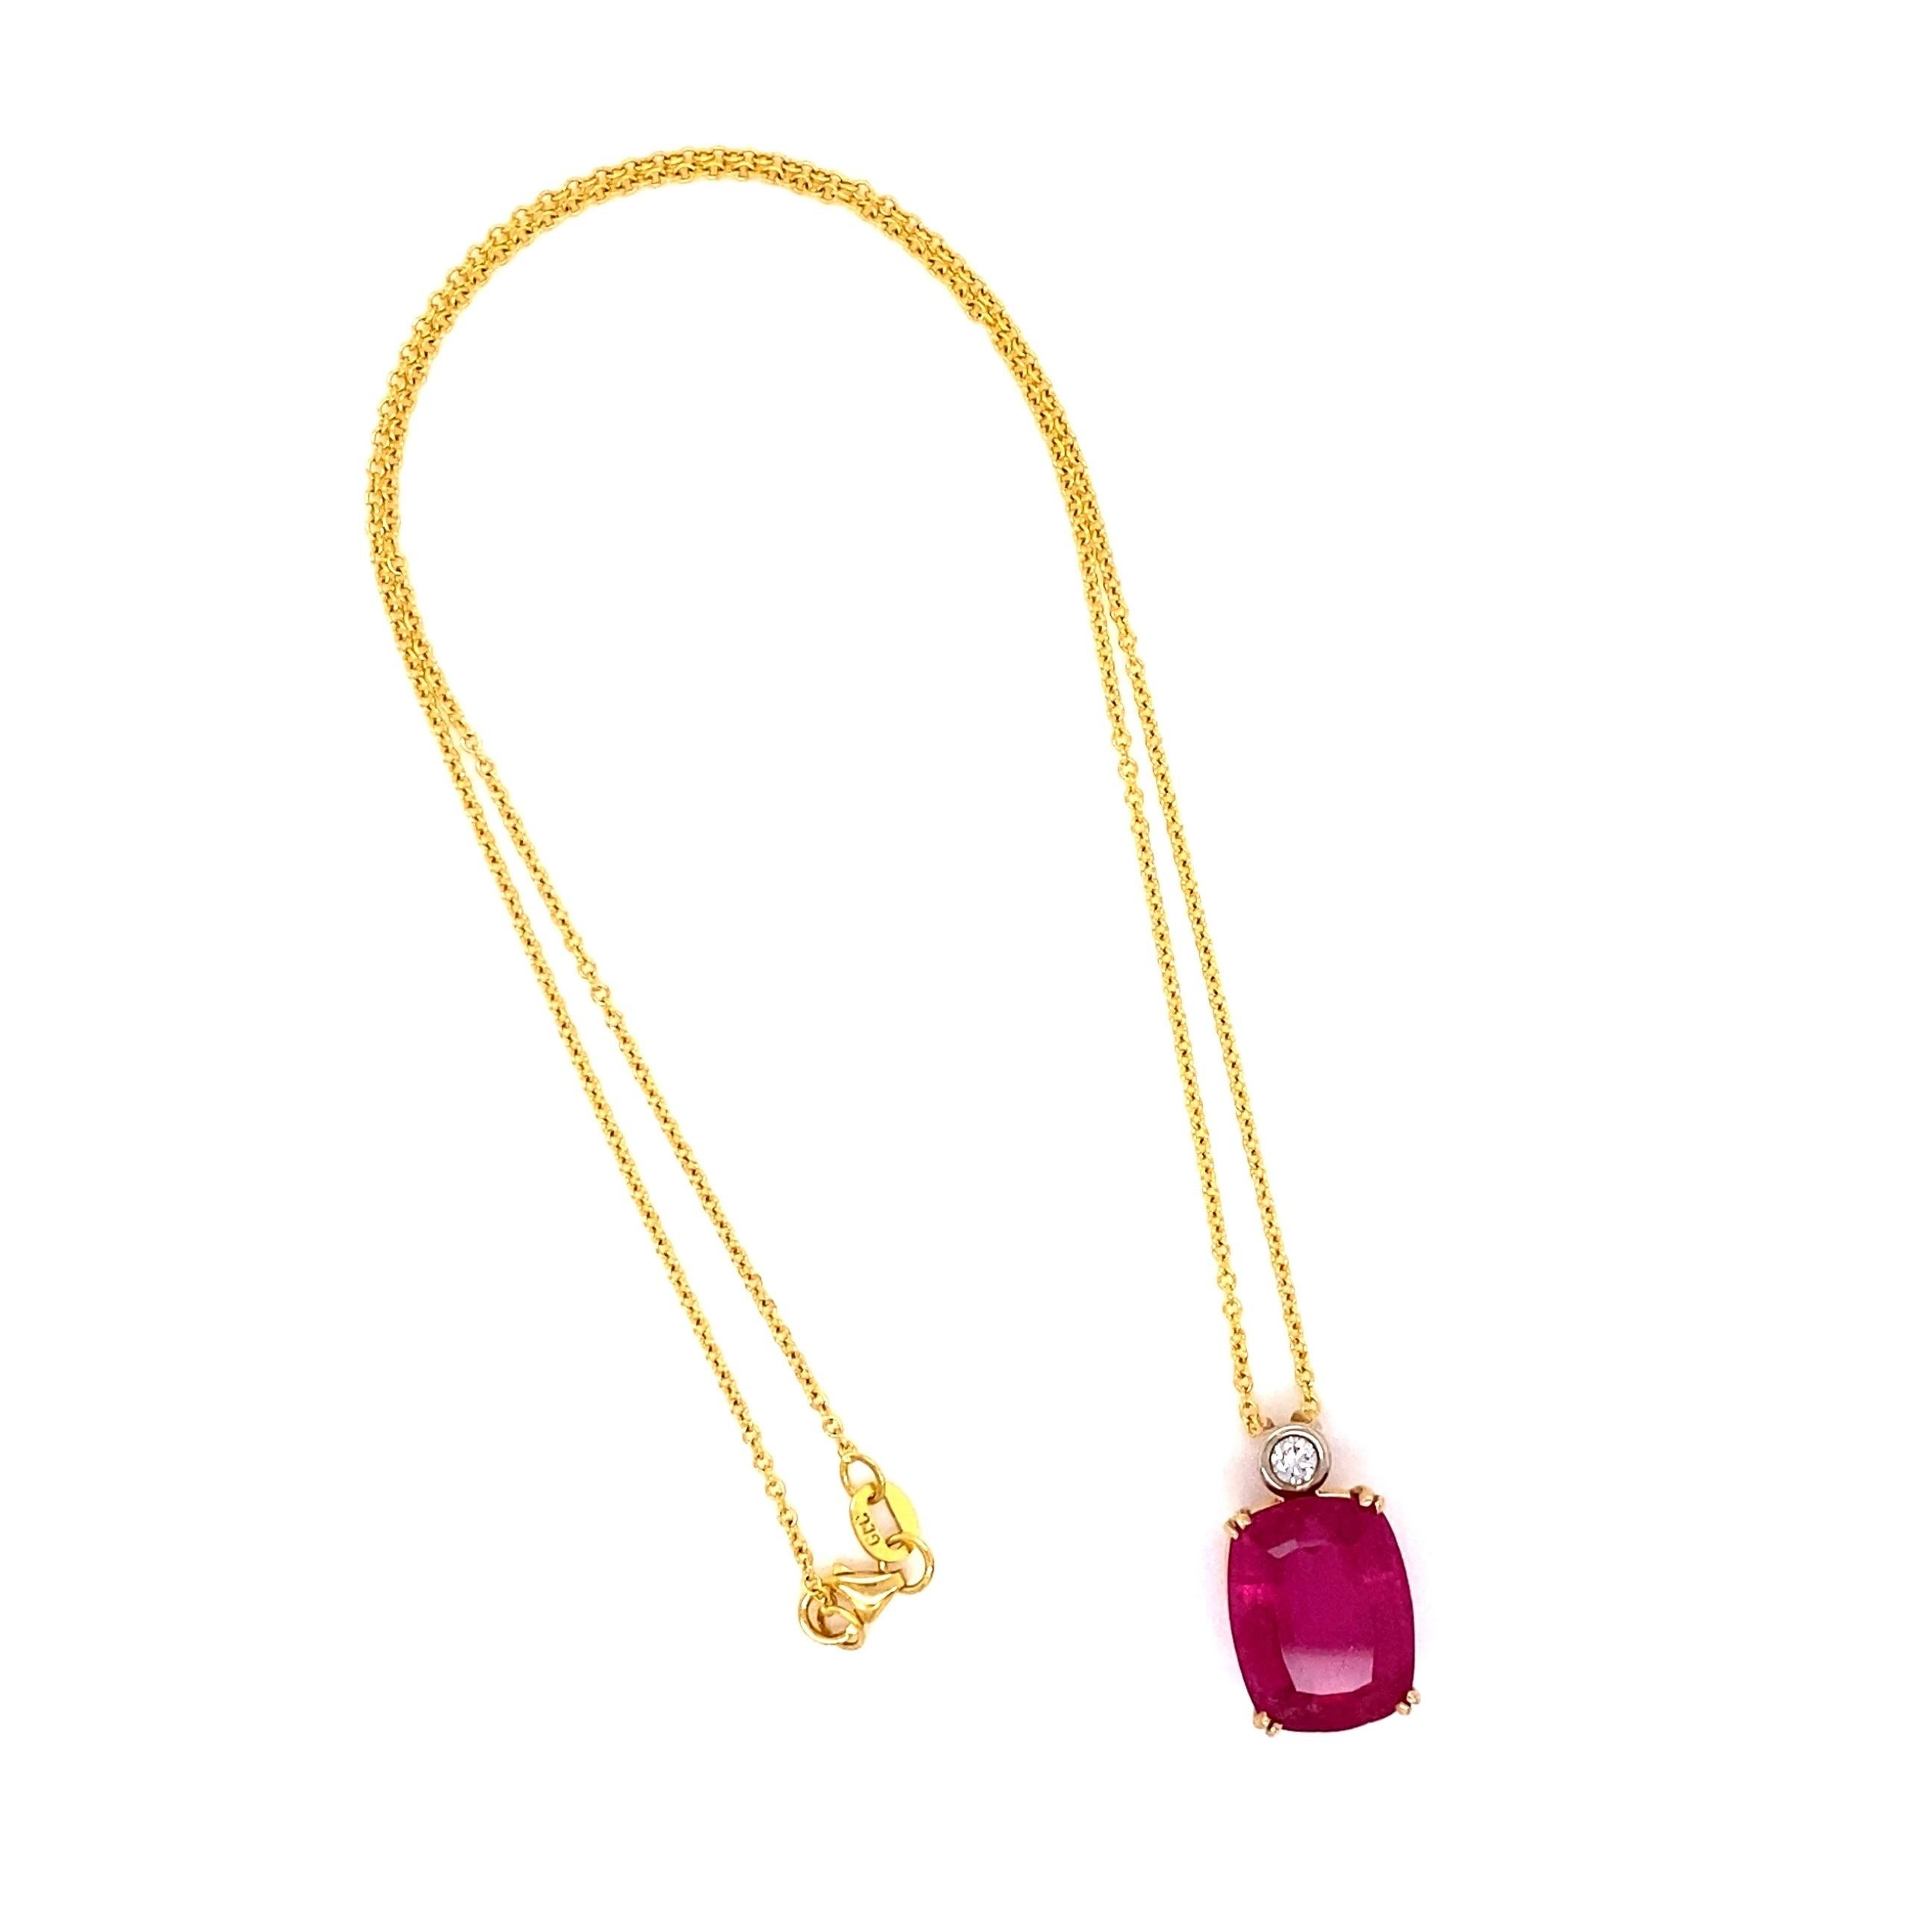 Beautiful Rubelite Tourmaline and Diamond Pendant Necklace, centering a securely set Cushion Rubelite Tourmaline, weighing approx. 8.59 Carat, accented by a Diamond, approx. 0.12 Carat. Dimensions: 0.33